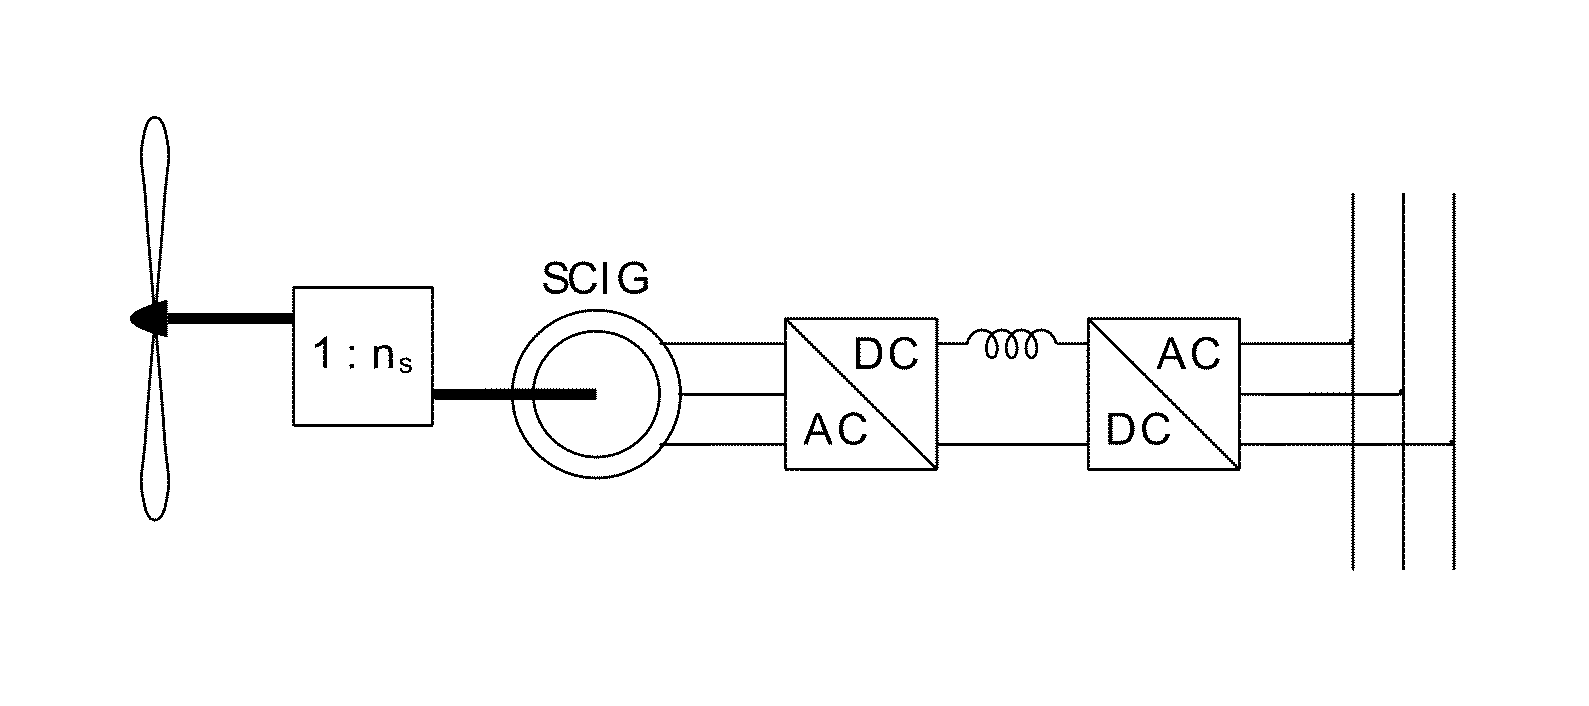 Generator-fault-tolerant control for a variable-speed variable-pitch wind turbine